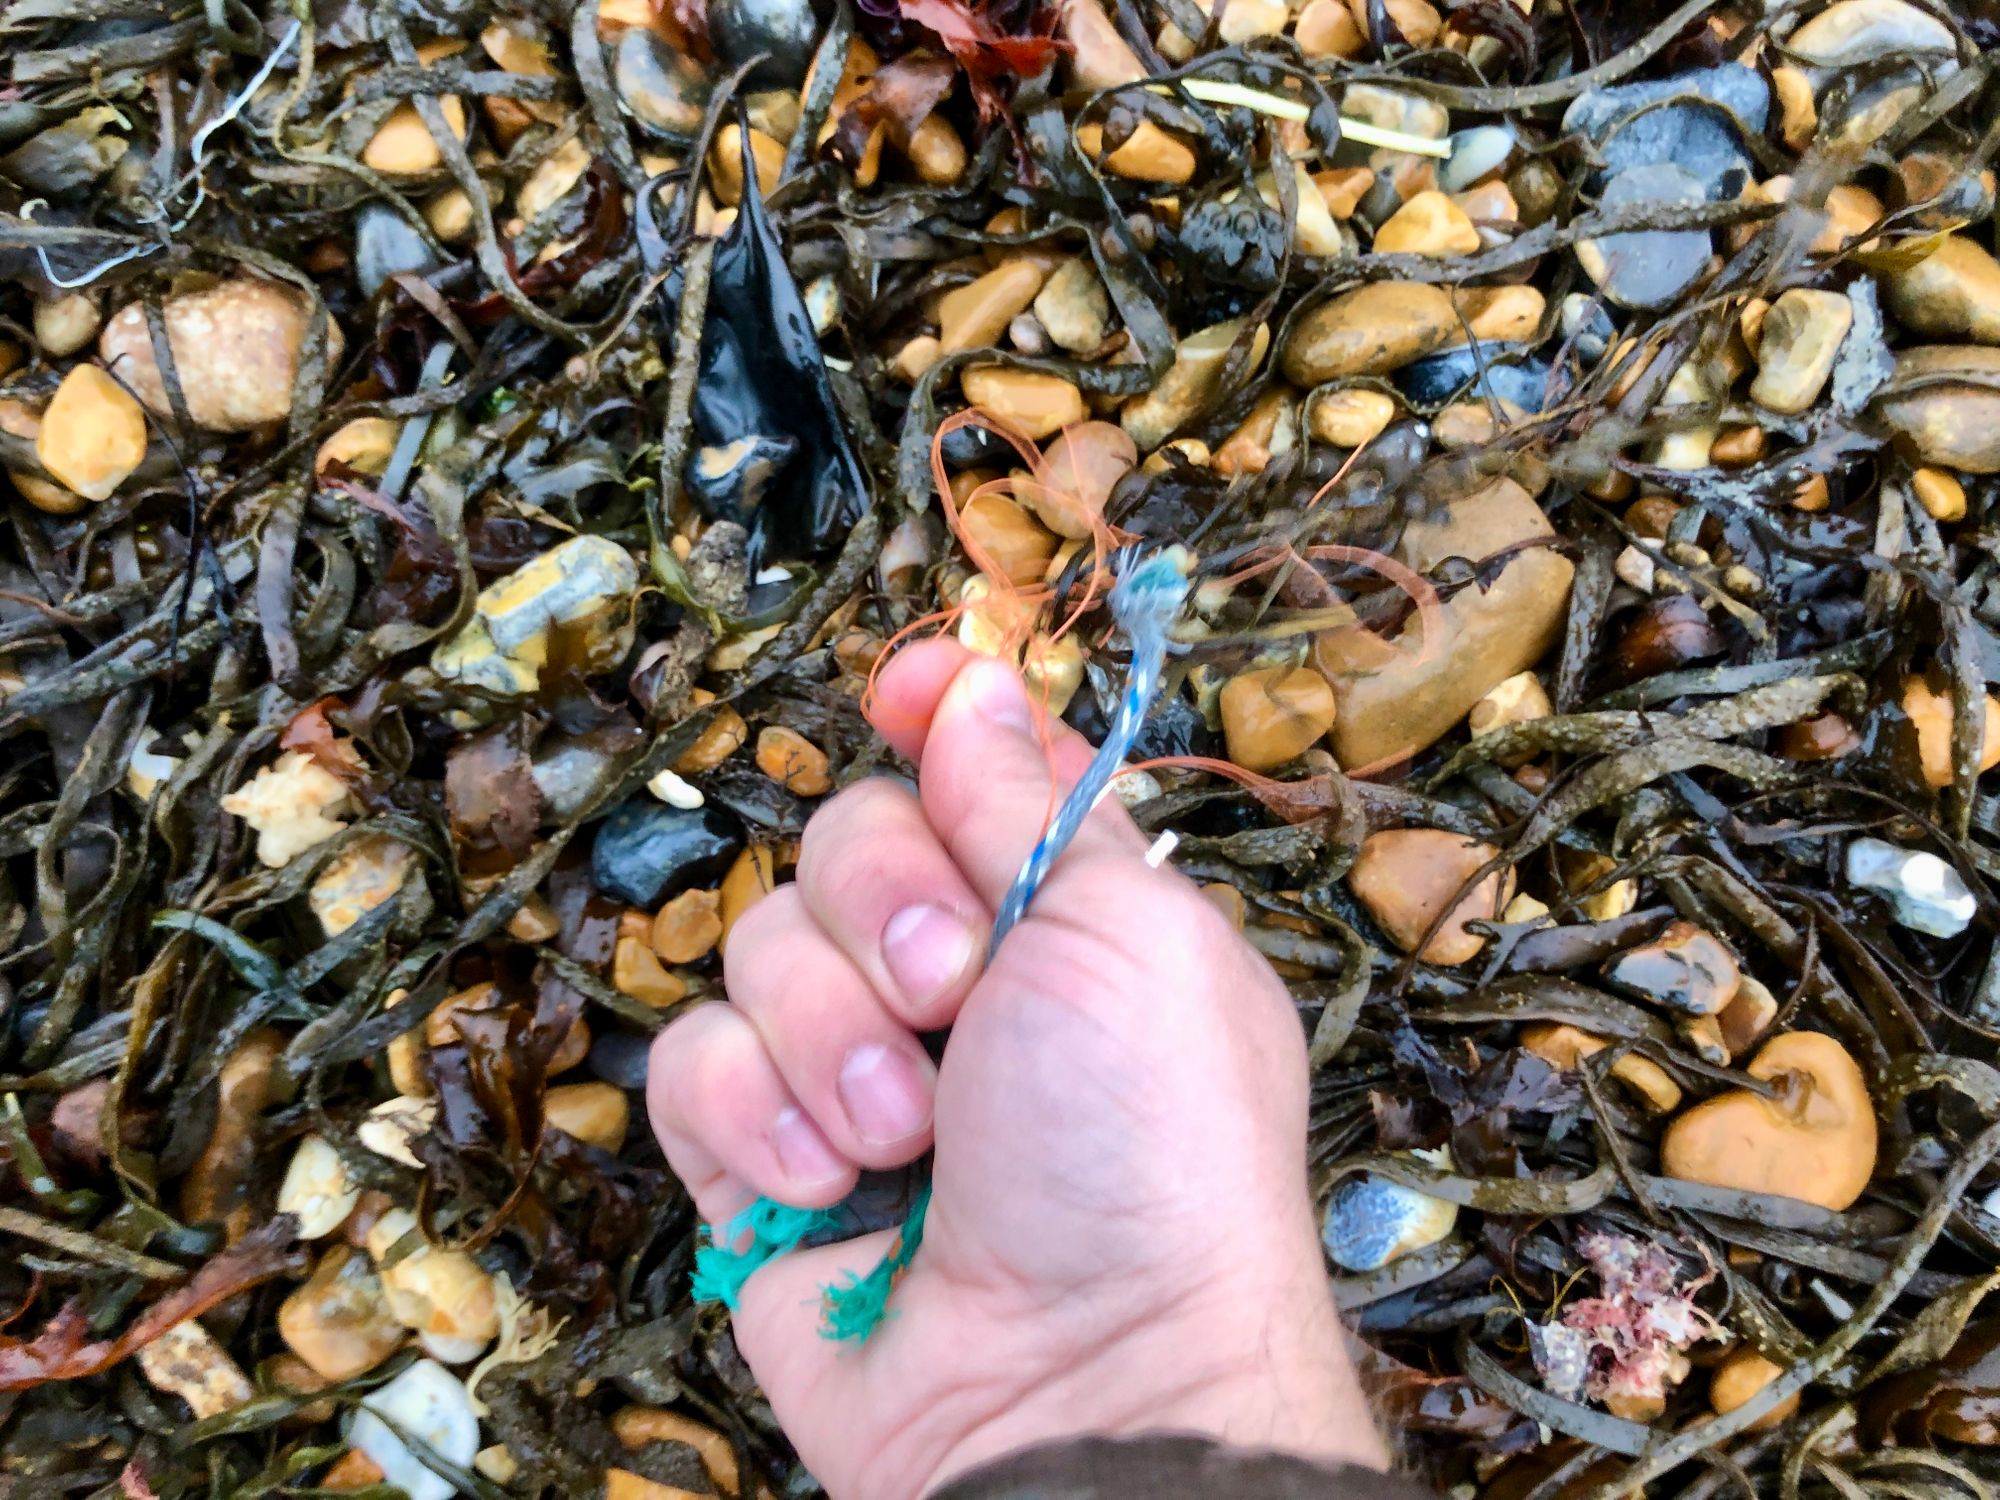 Picking plastic rope off the beach